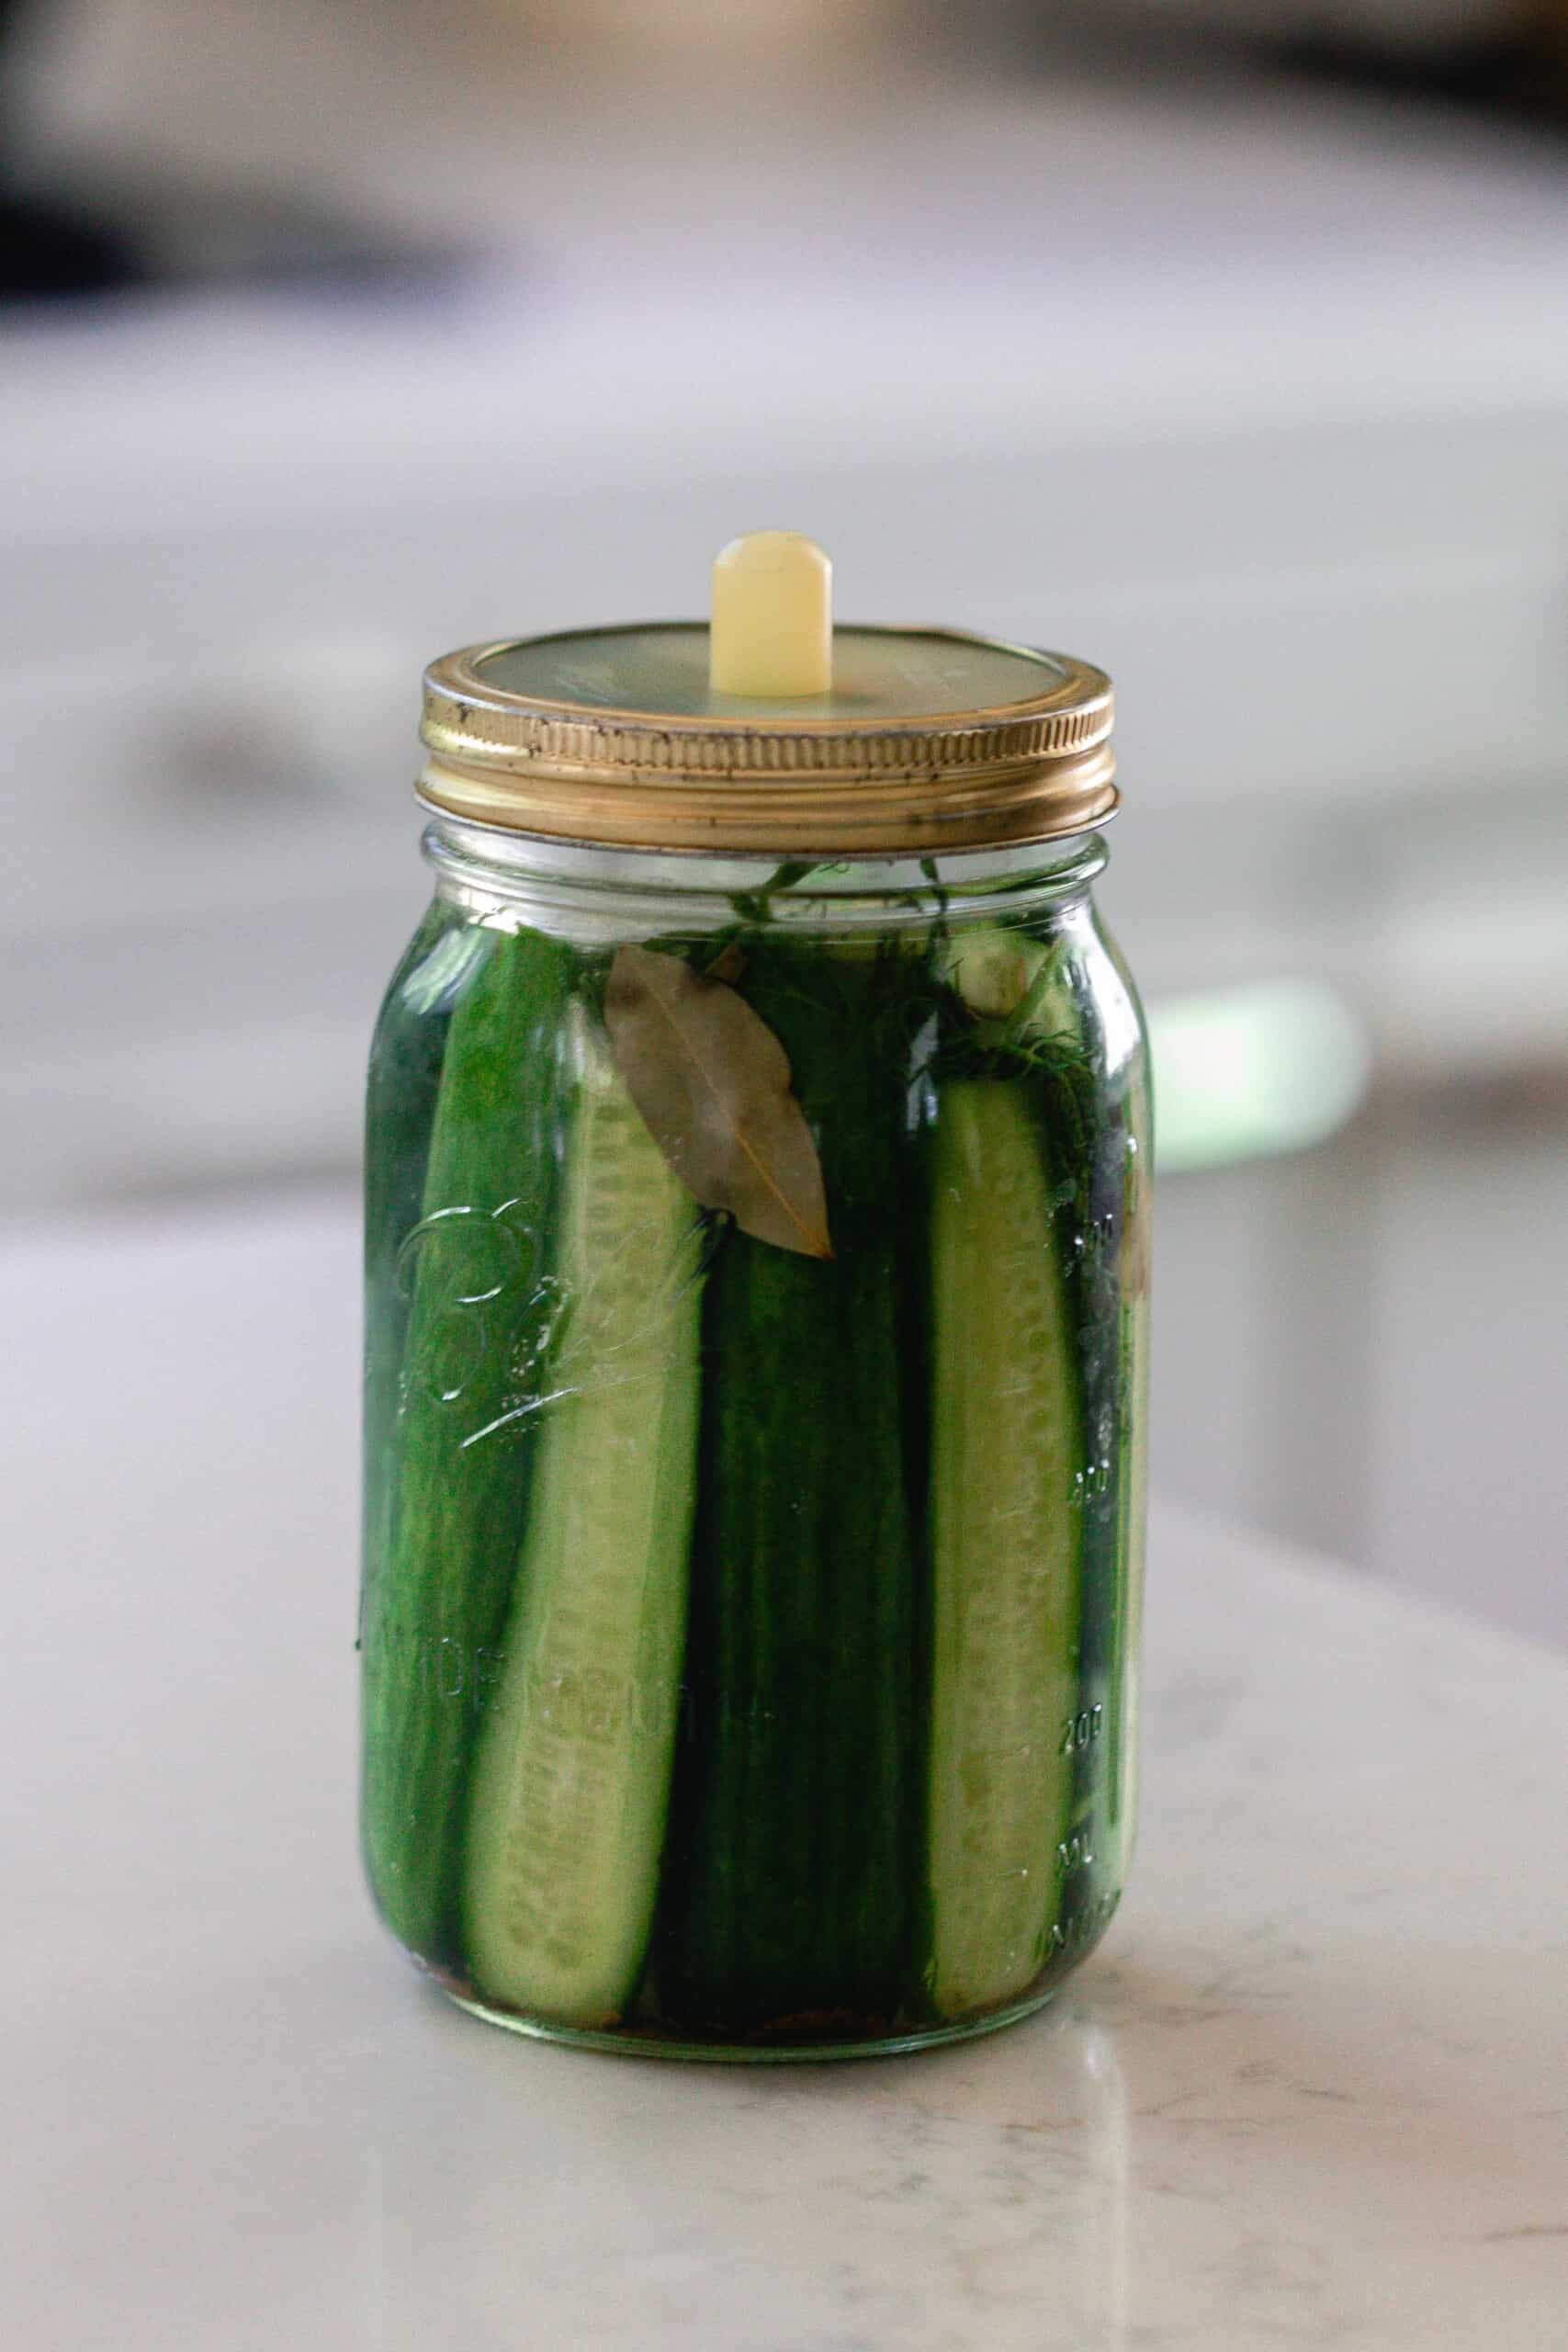 store bought pickled vegetables